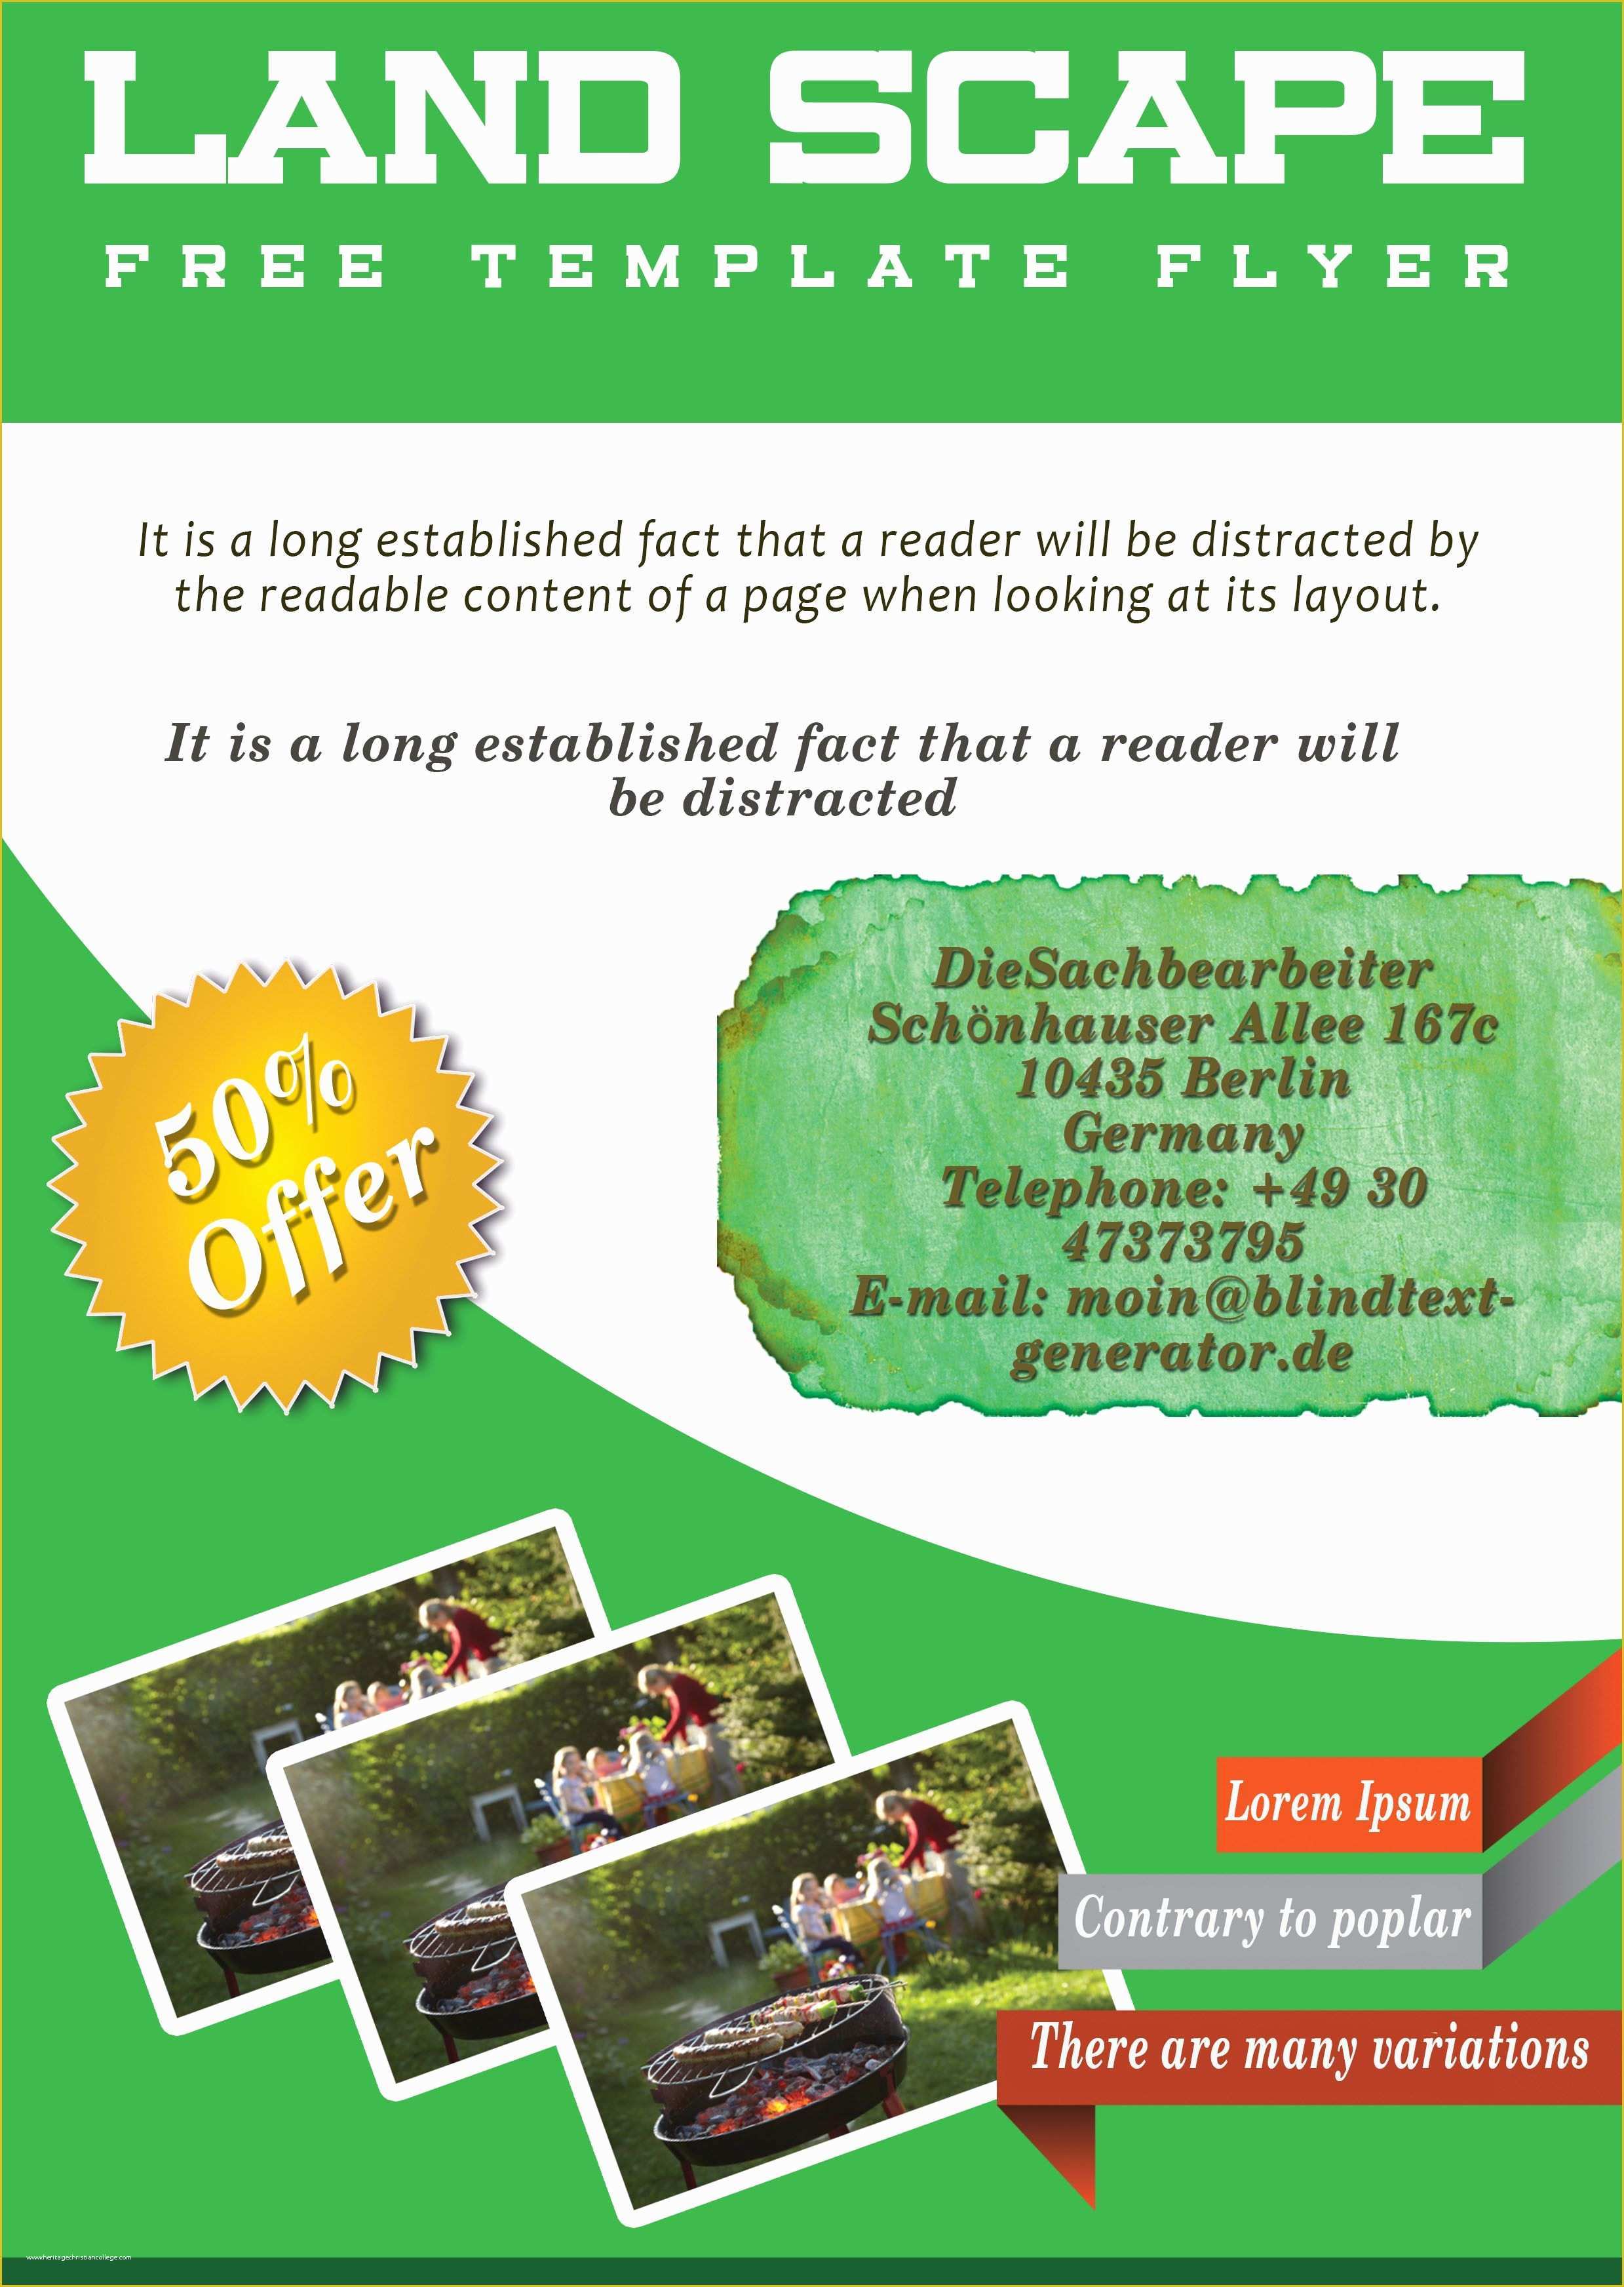 Free Flyer Templates Online Of Free Landscaping Flyer Templates to Power Lawn Care